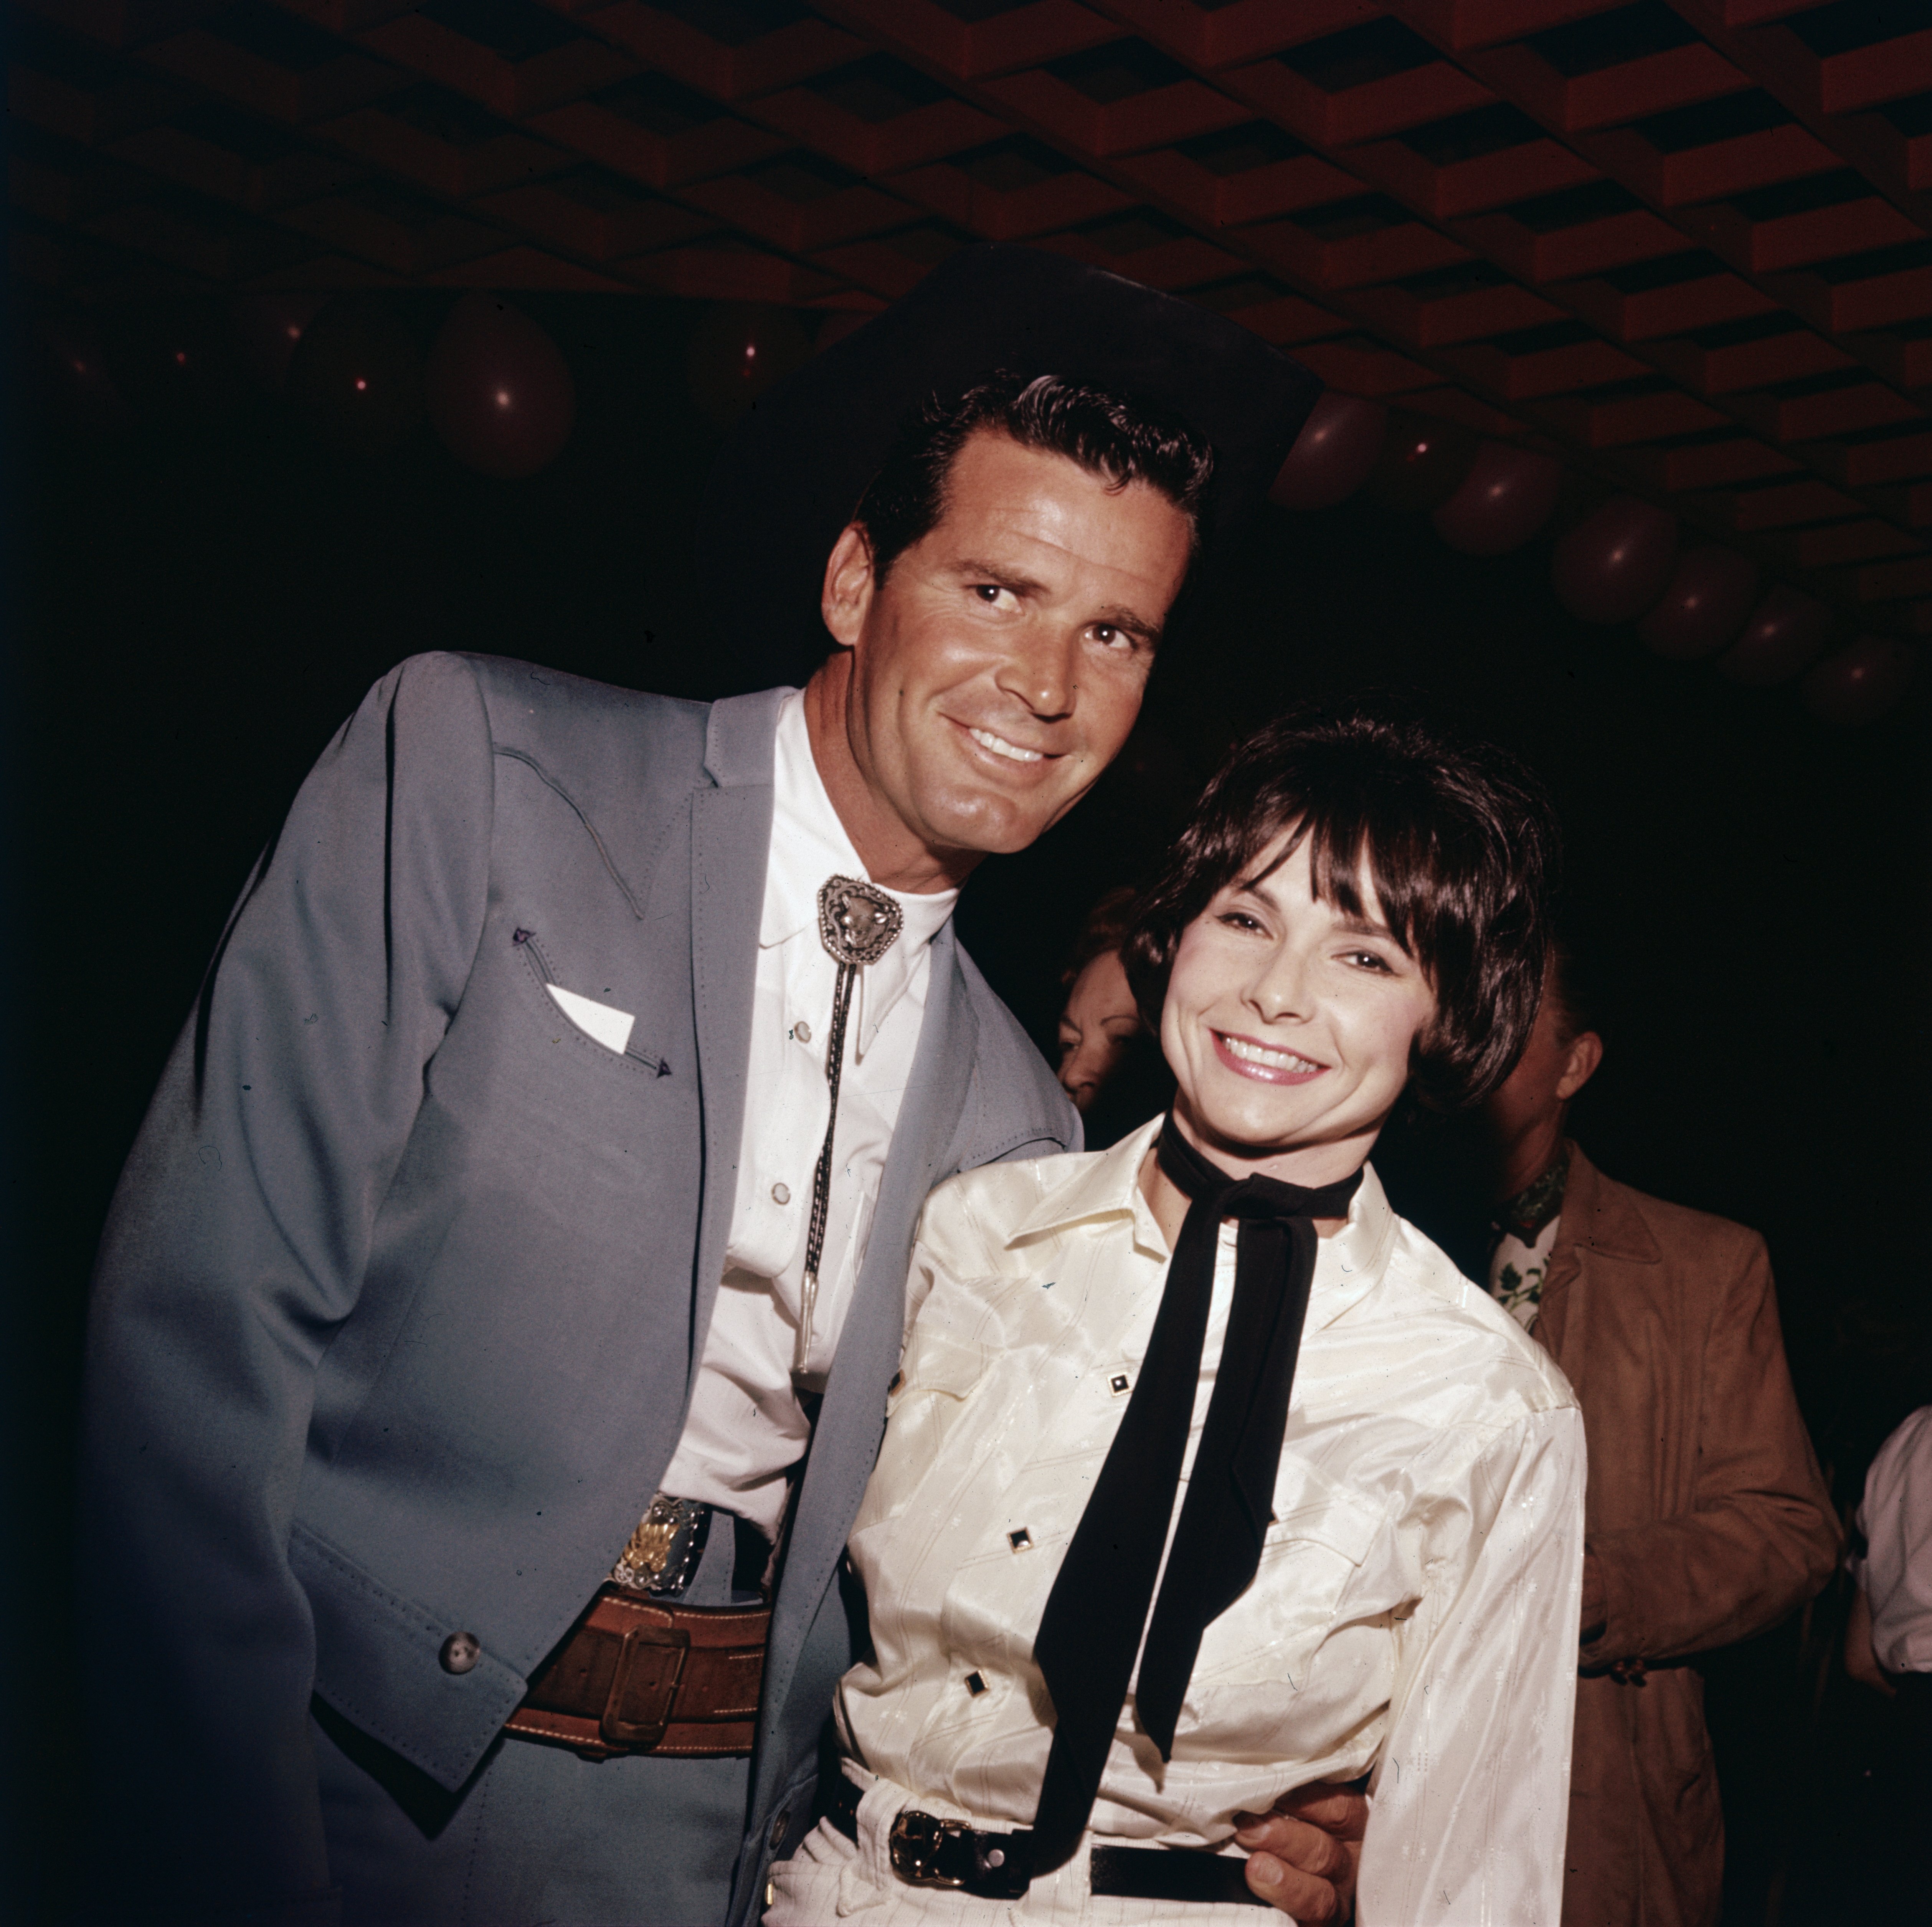 James Garner smiles with his wife, Lois Clarke, as they wear Western gear at a party 1960s. | Source: Getty Images